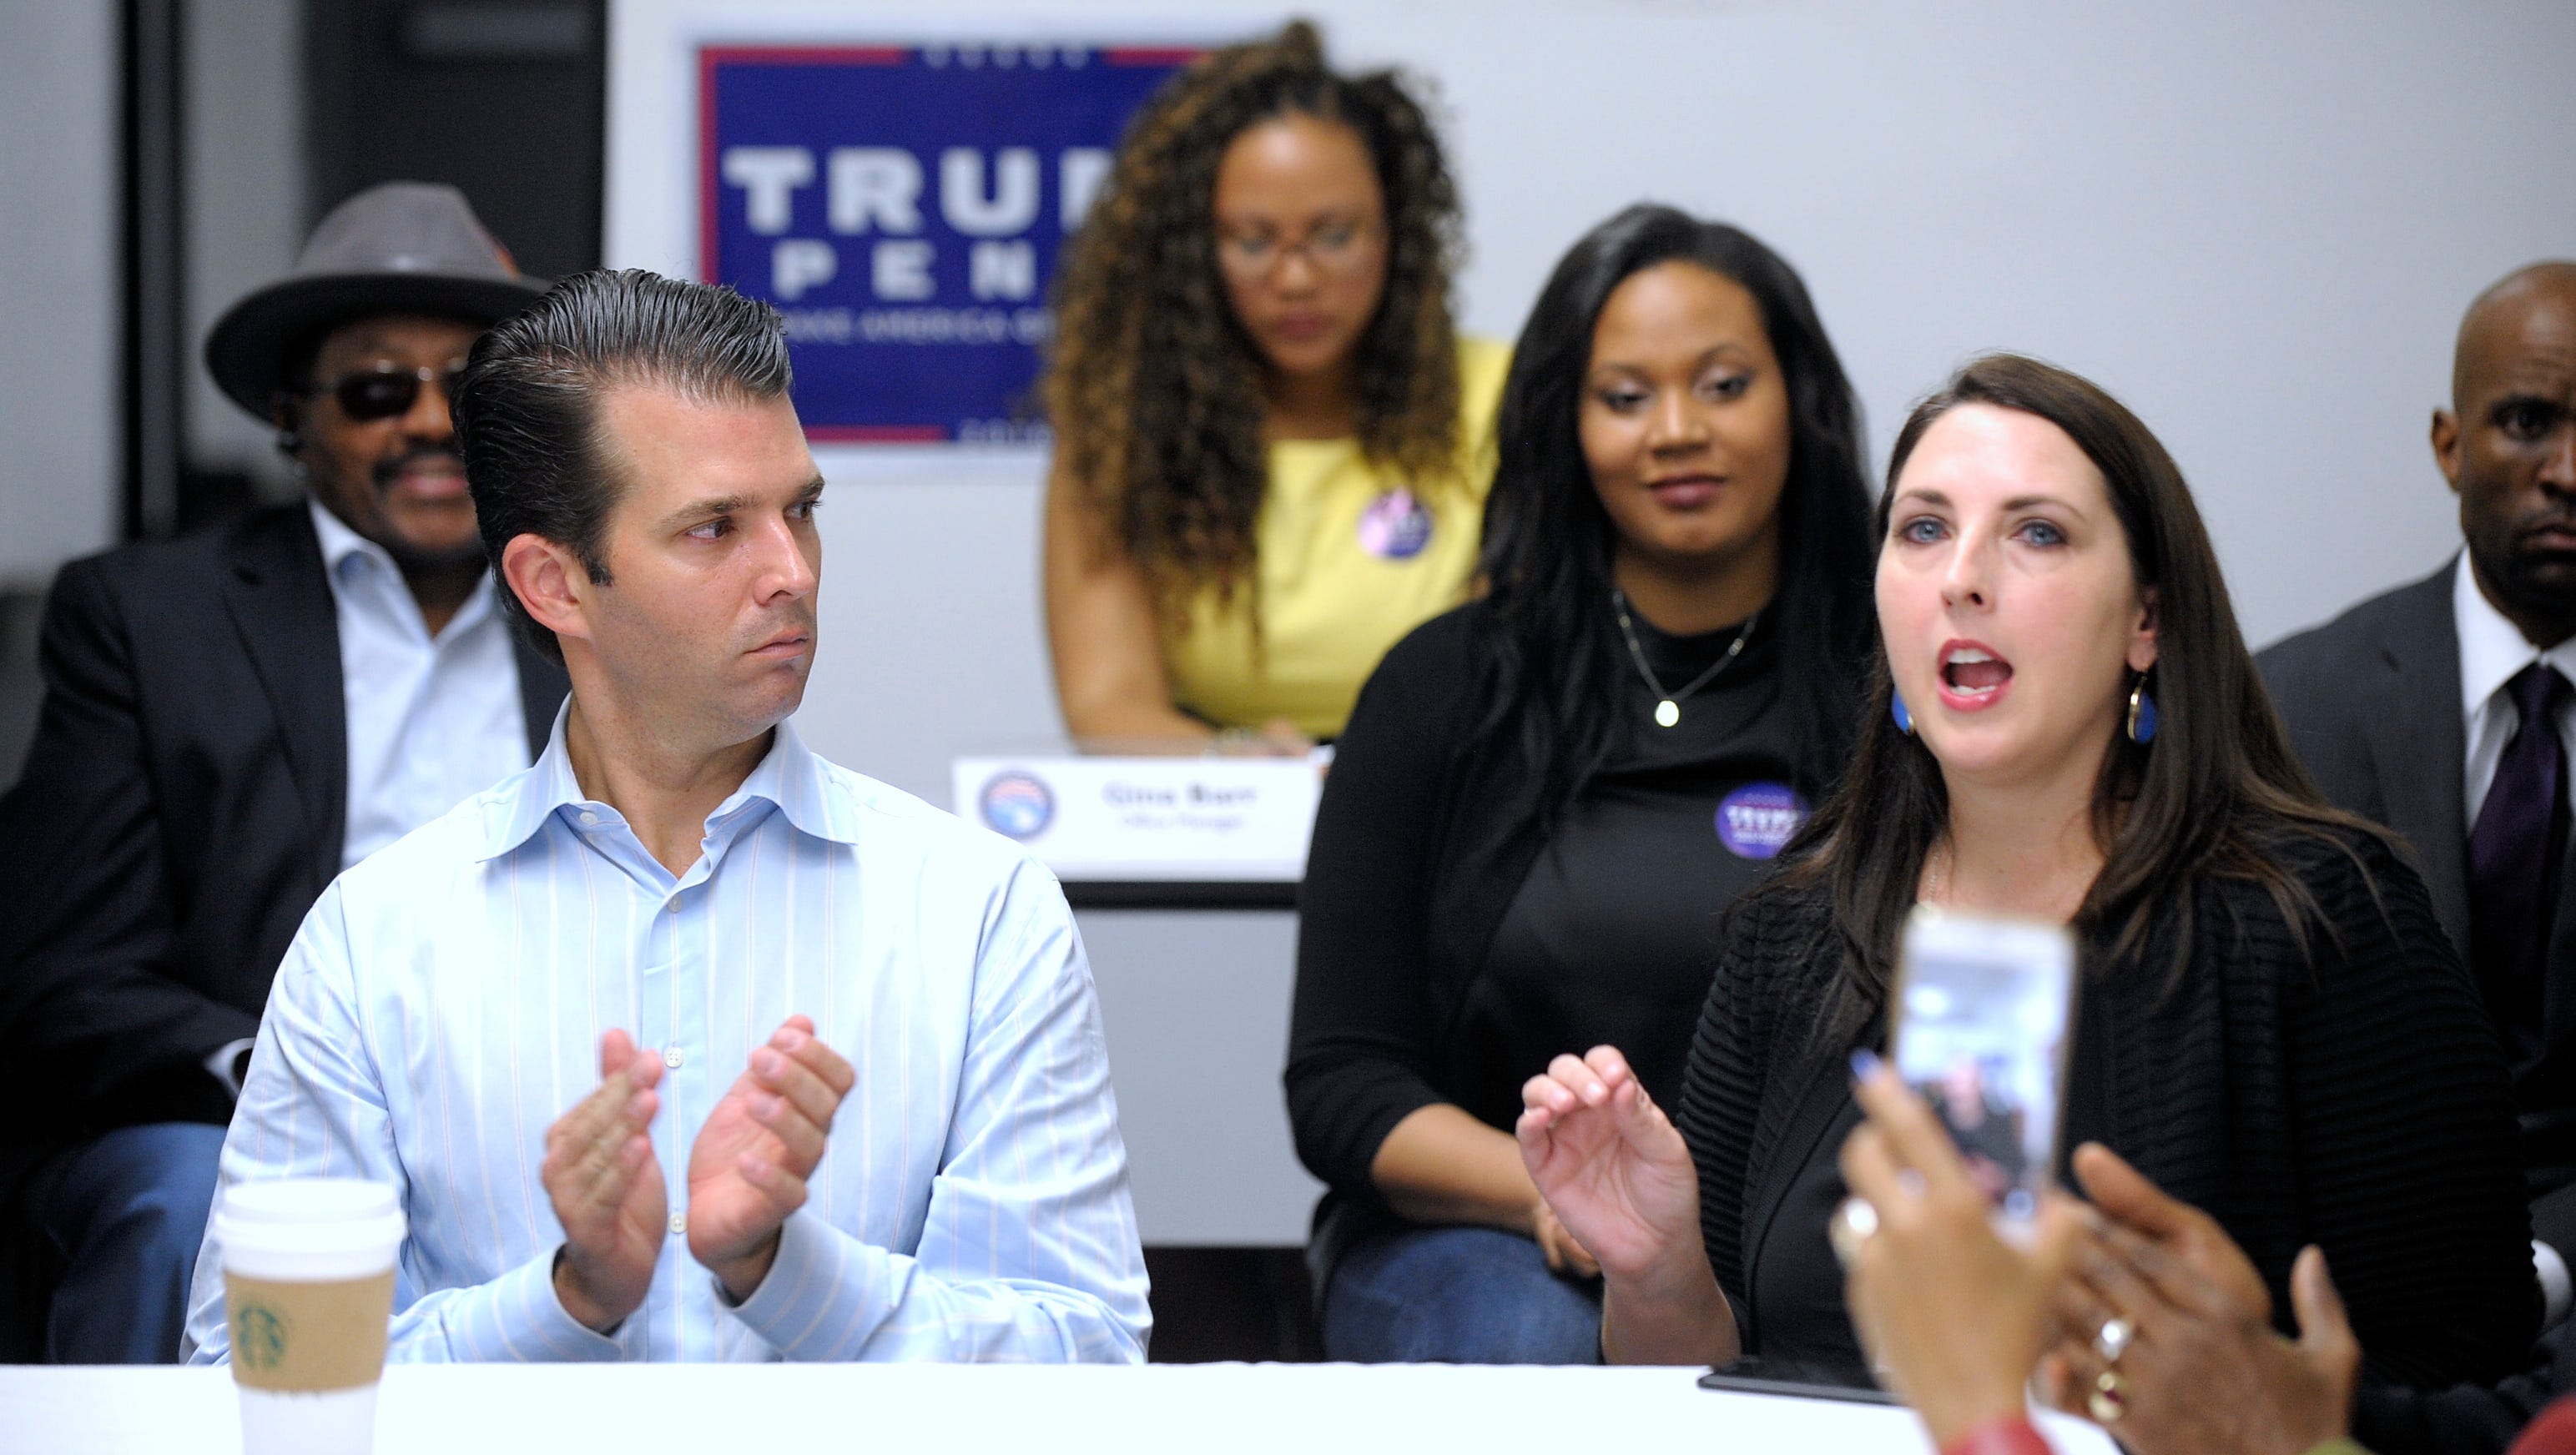 Ronna Romney McDaniel, right, Michigan Republican Party chairman, talks during the event as Donald Trump Jr., left, claps.